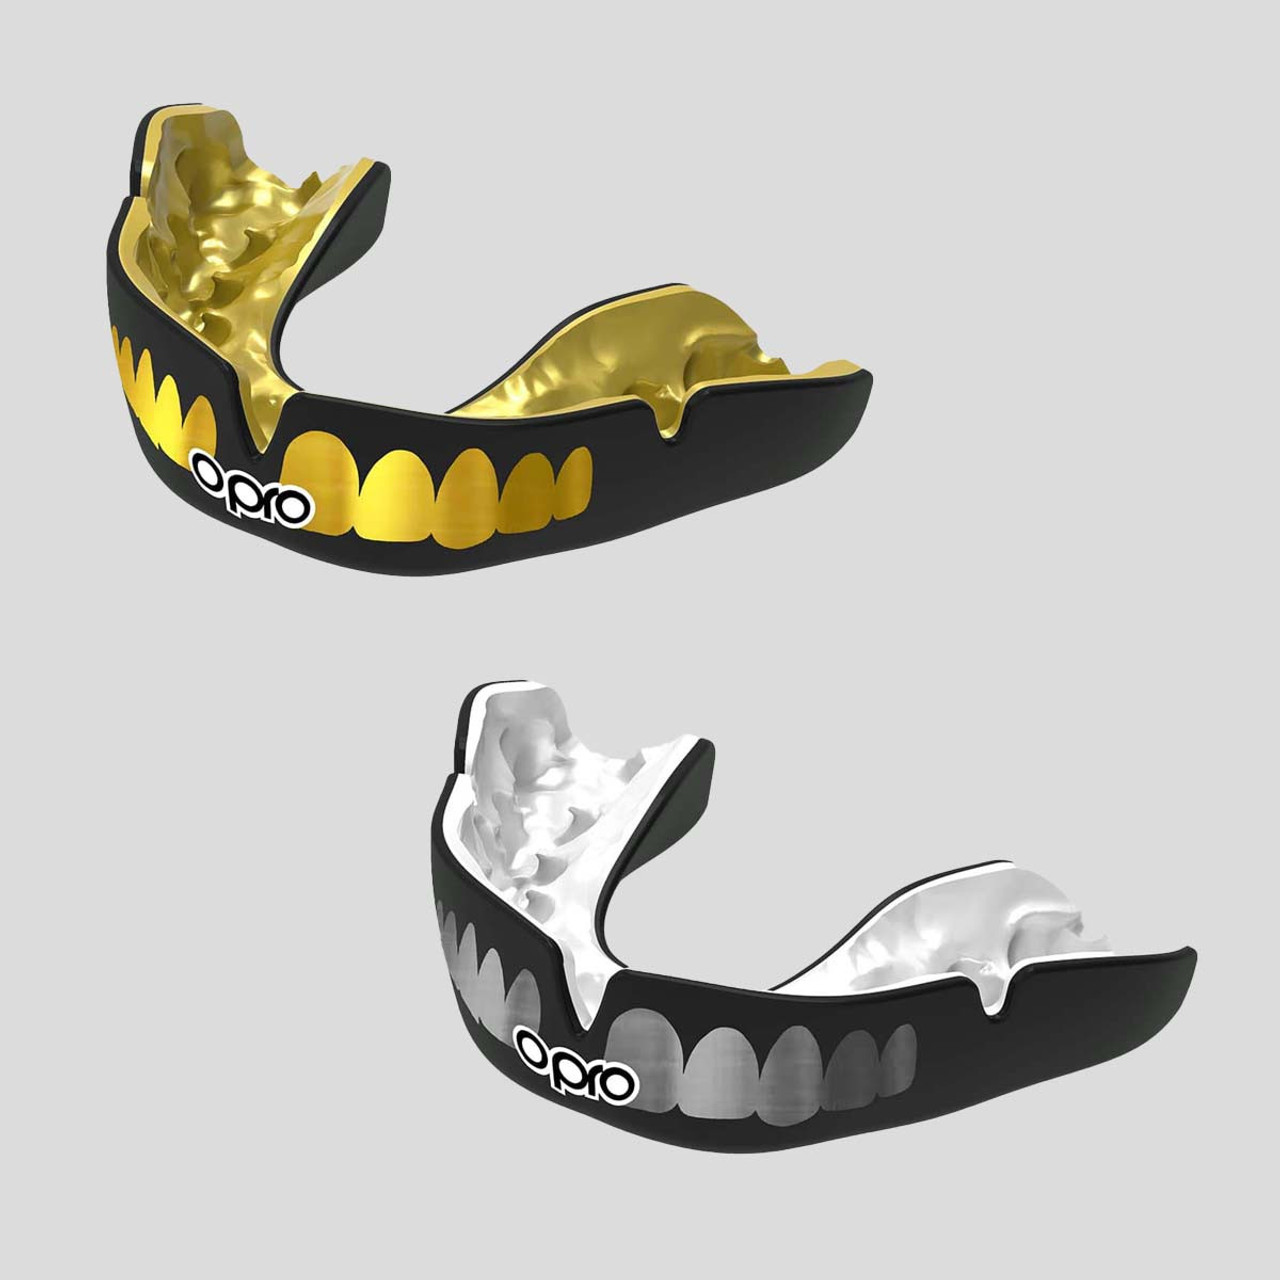 Real Teeth Mouthguards - Hilarious, Unique, and Protective - Mouthpiece Guy